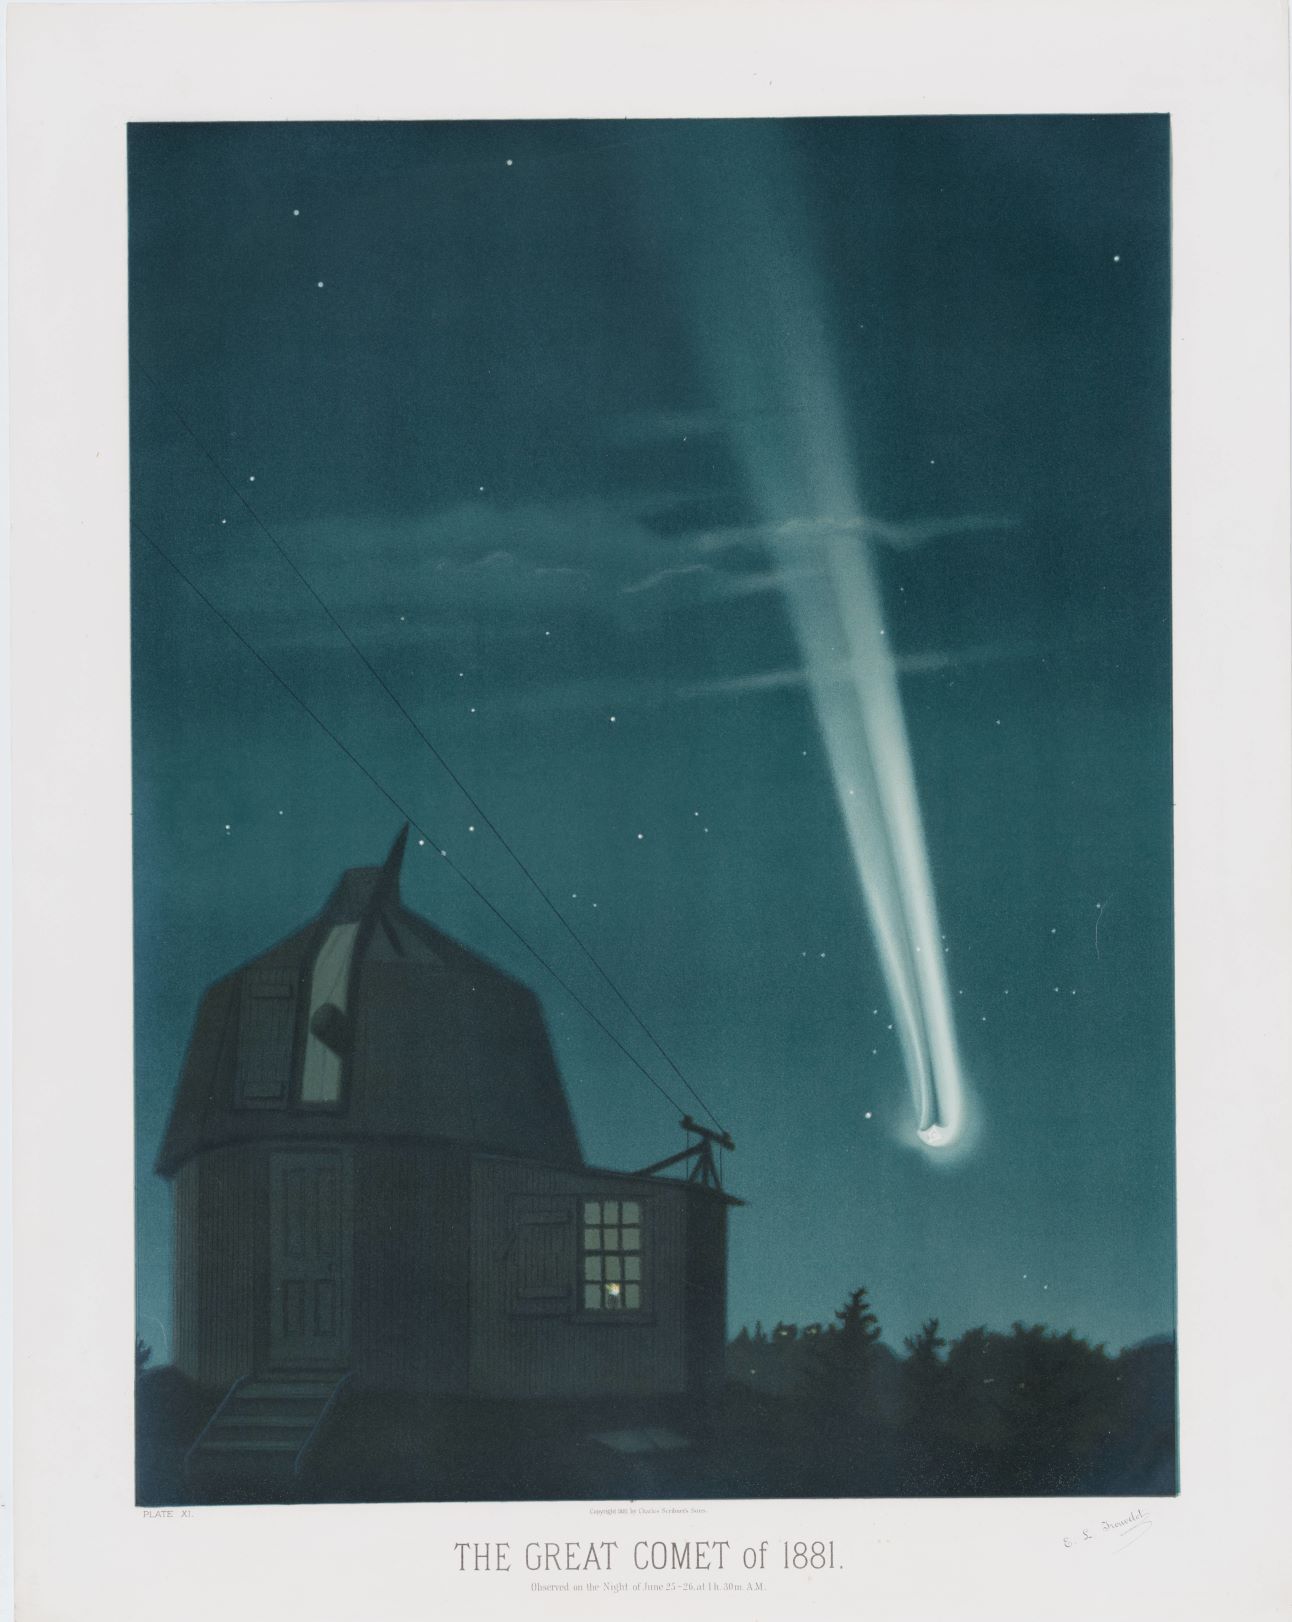 A comet descends through the night sky toward earth. On earth, a house with a telescope stands next to a grouping of trees.